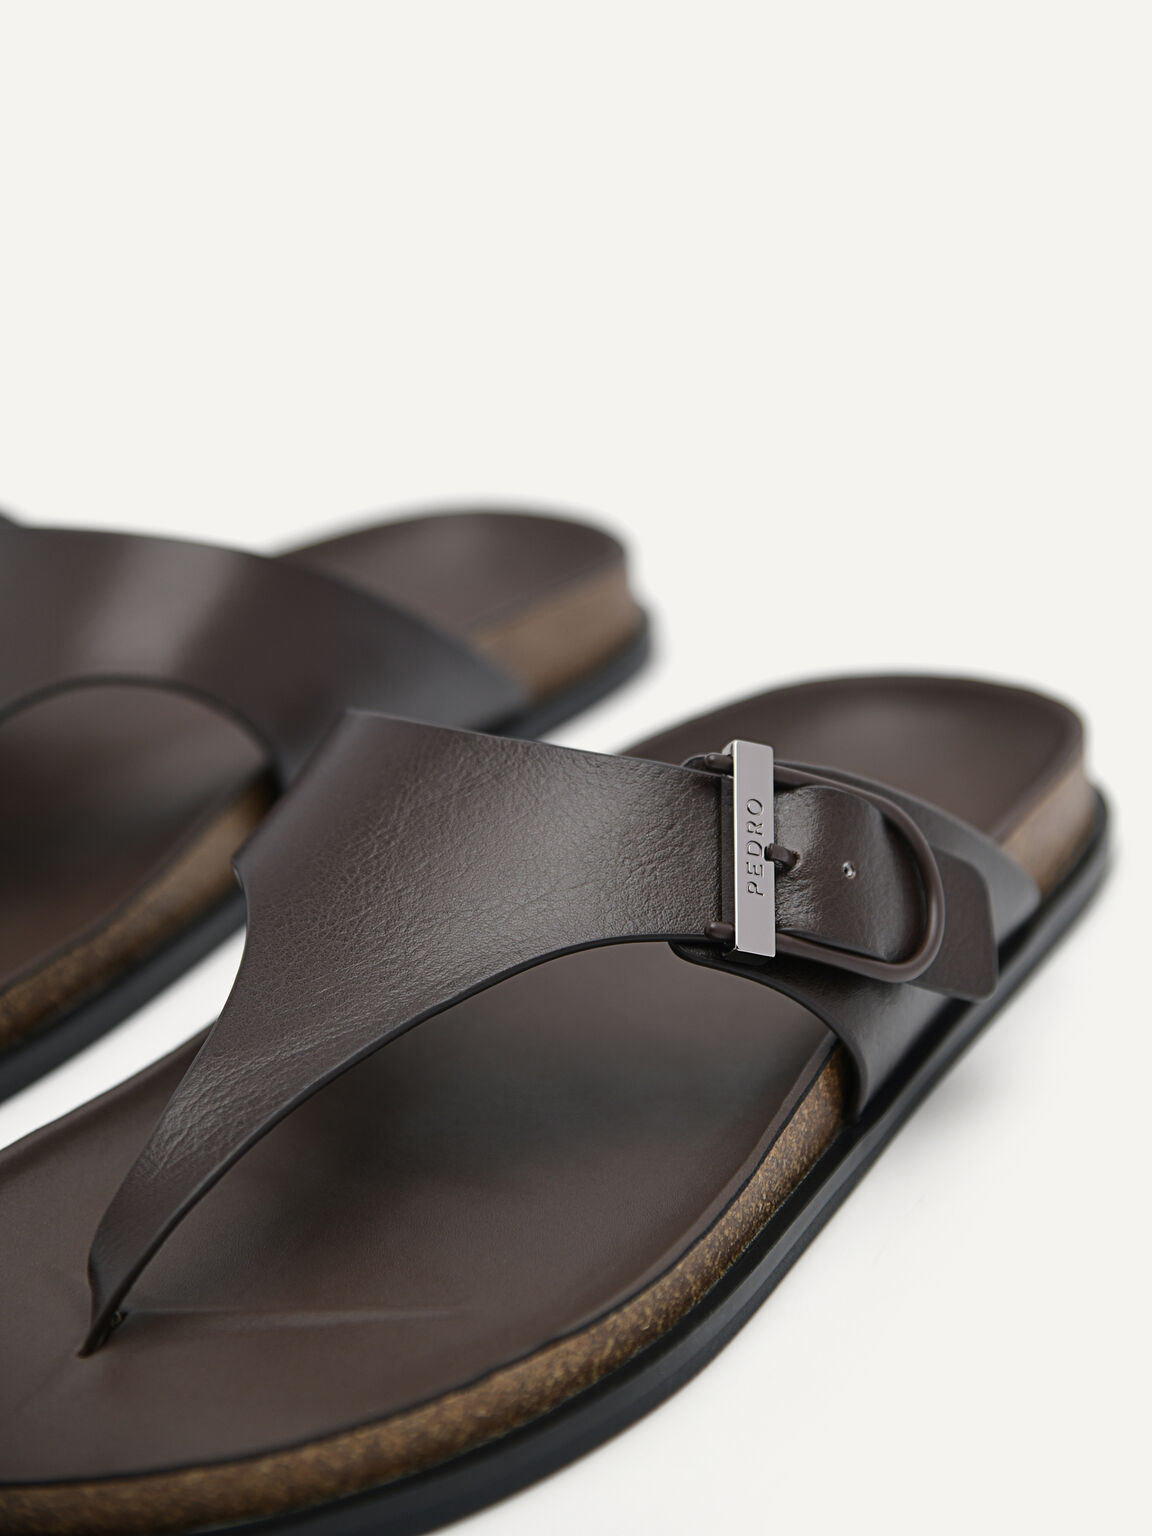 Synthetic Leather Thong Sandals, Dark Brown